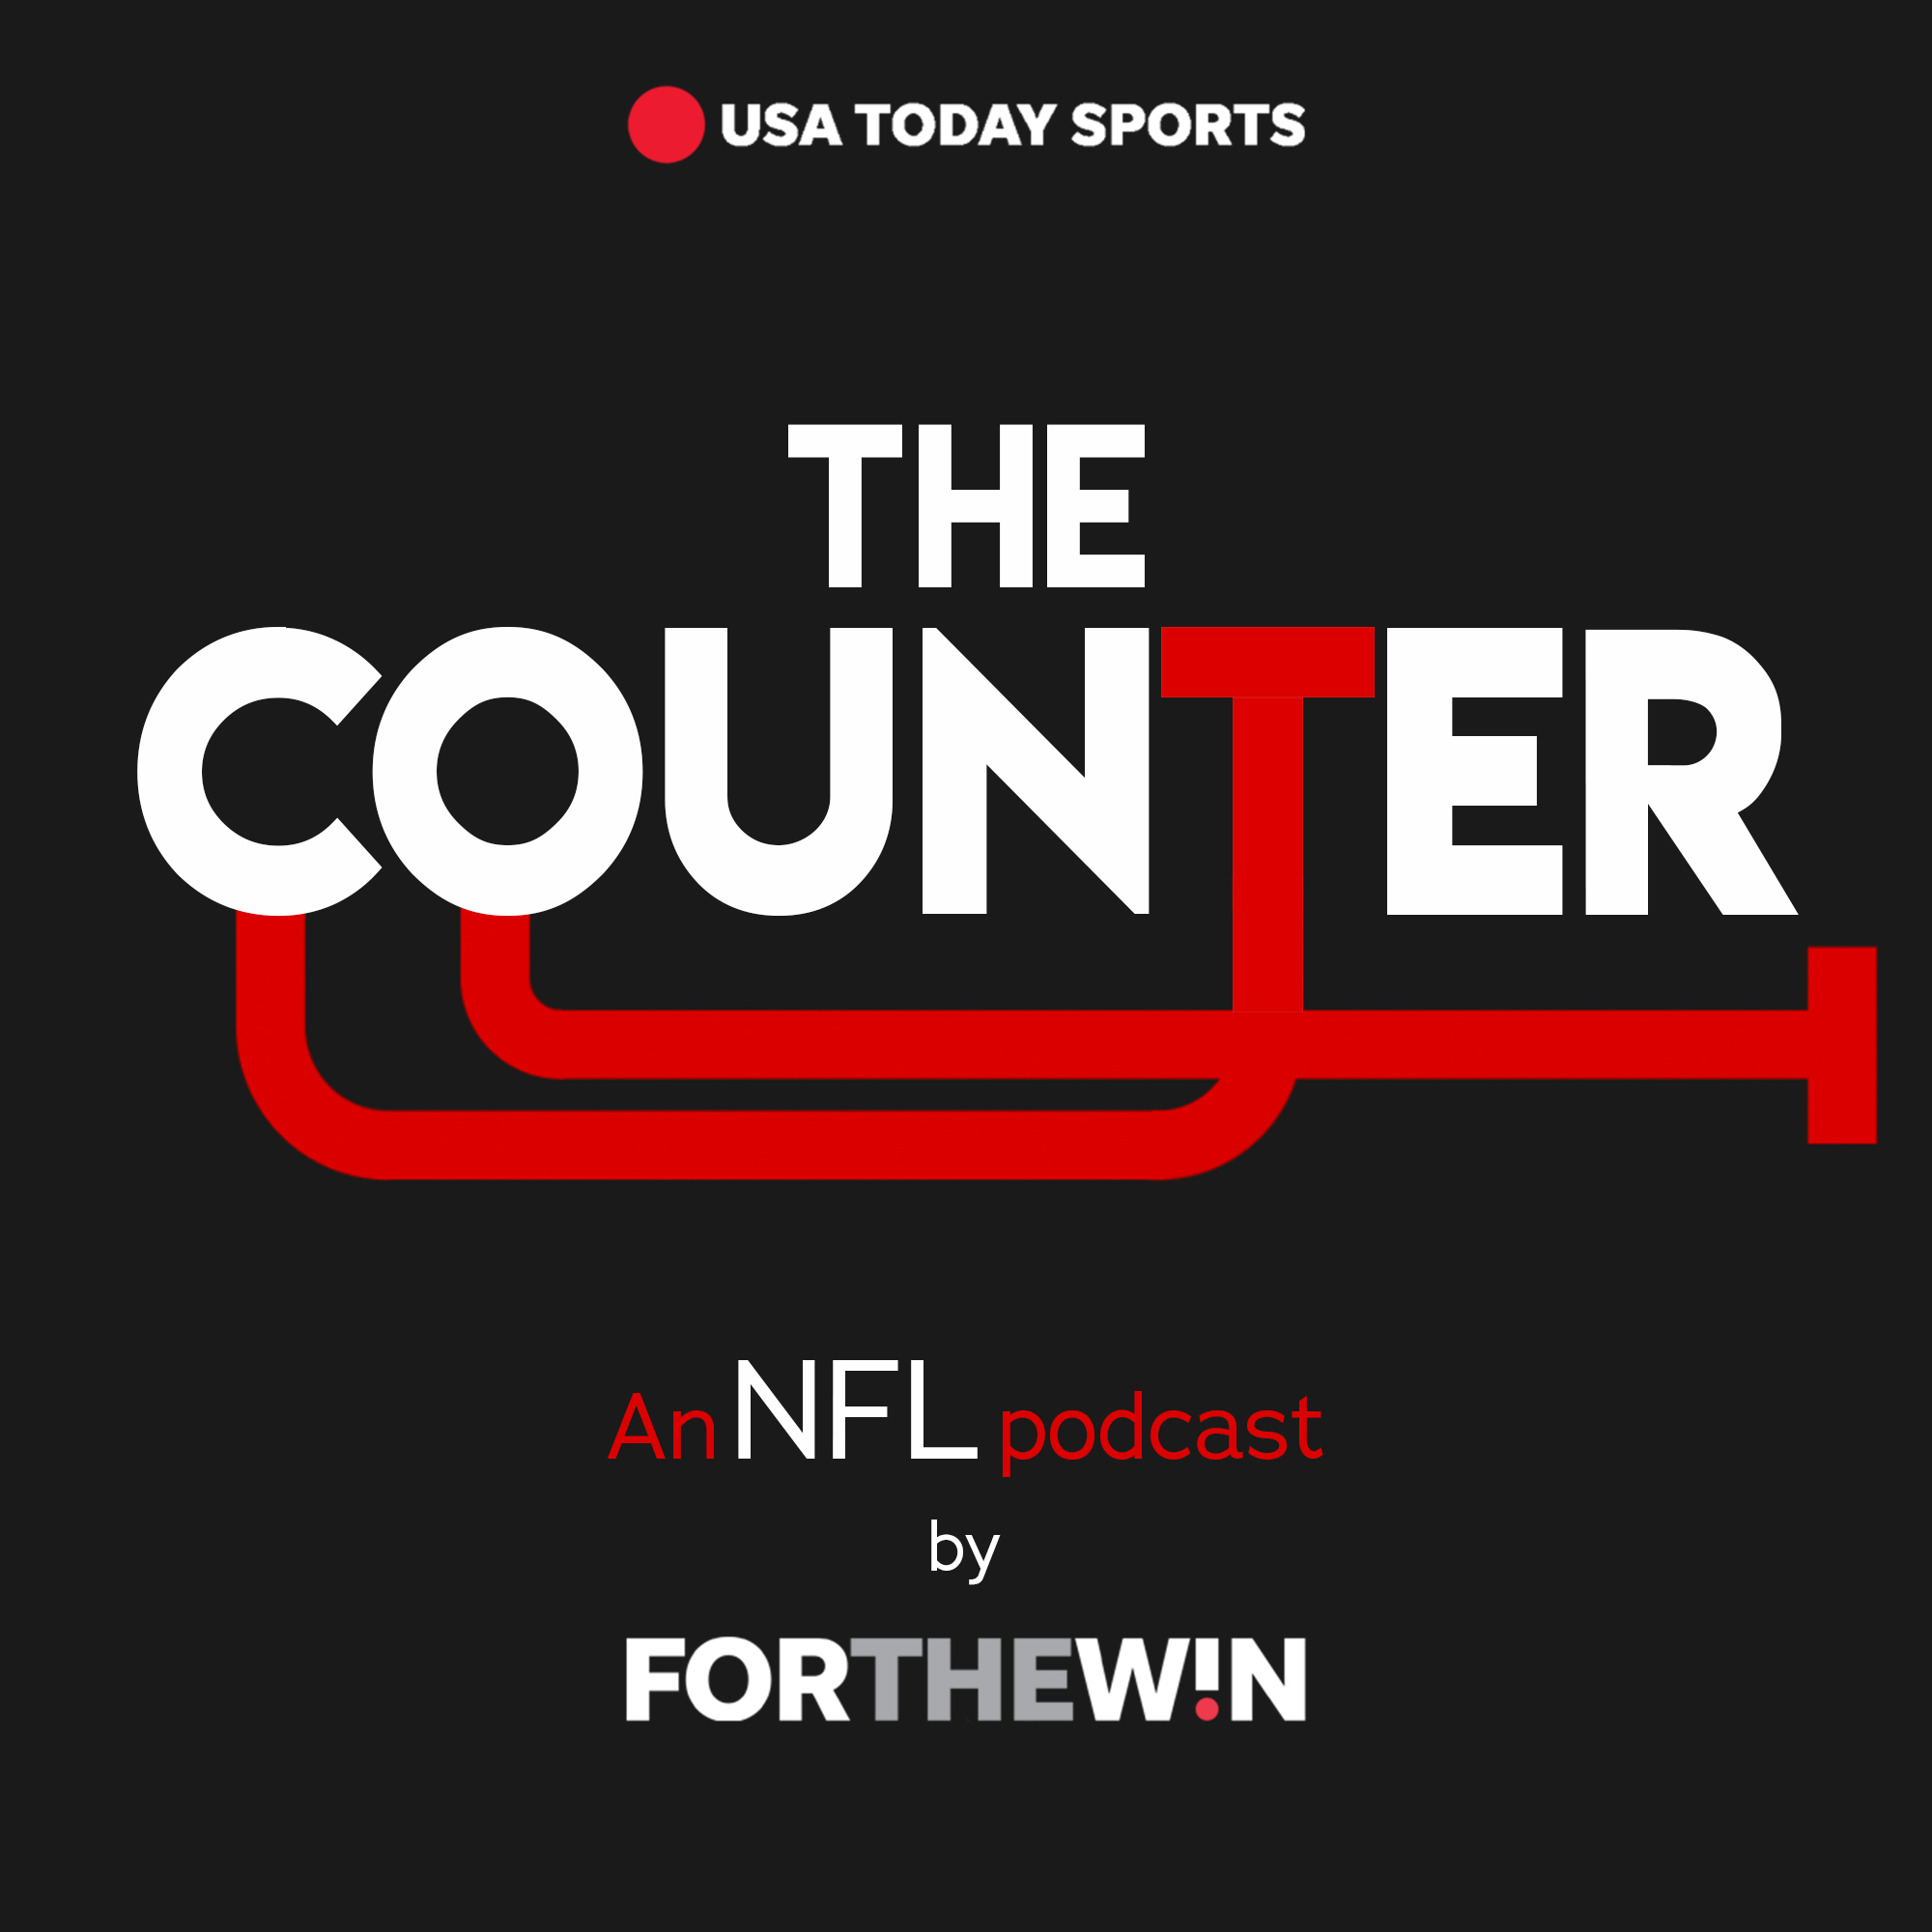 The Counter: An NFL Podcast by For The Win - Free agency analysis and Reviewing the QB situations around the league